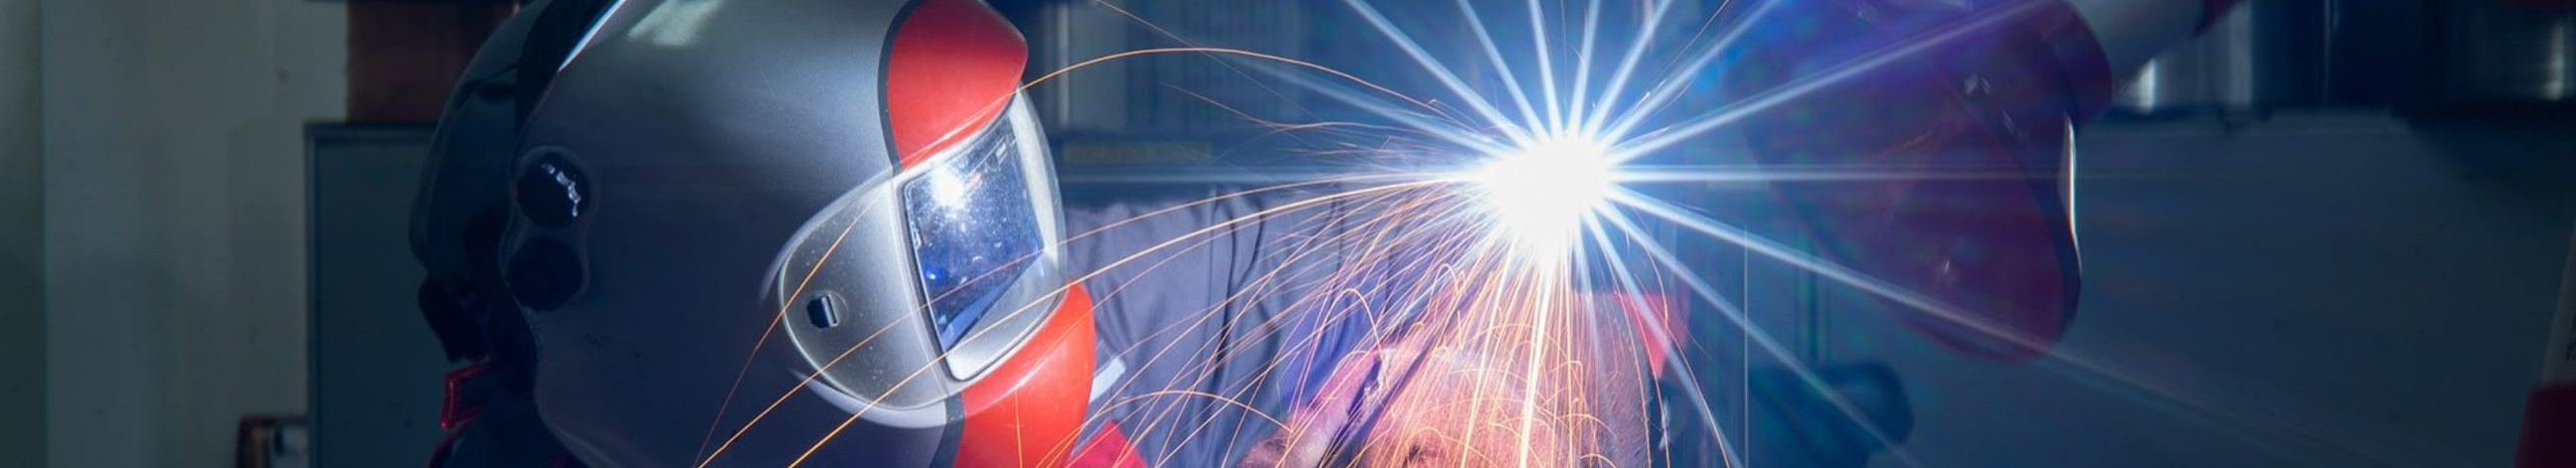 We provide comprehensive welding solutions including fixtures, cells, robot programming, and project coordination.